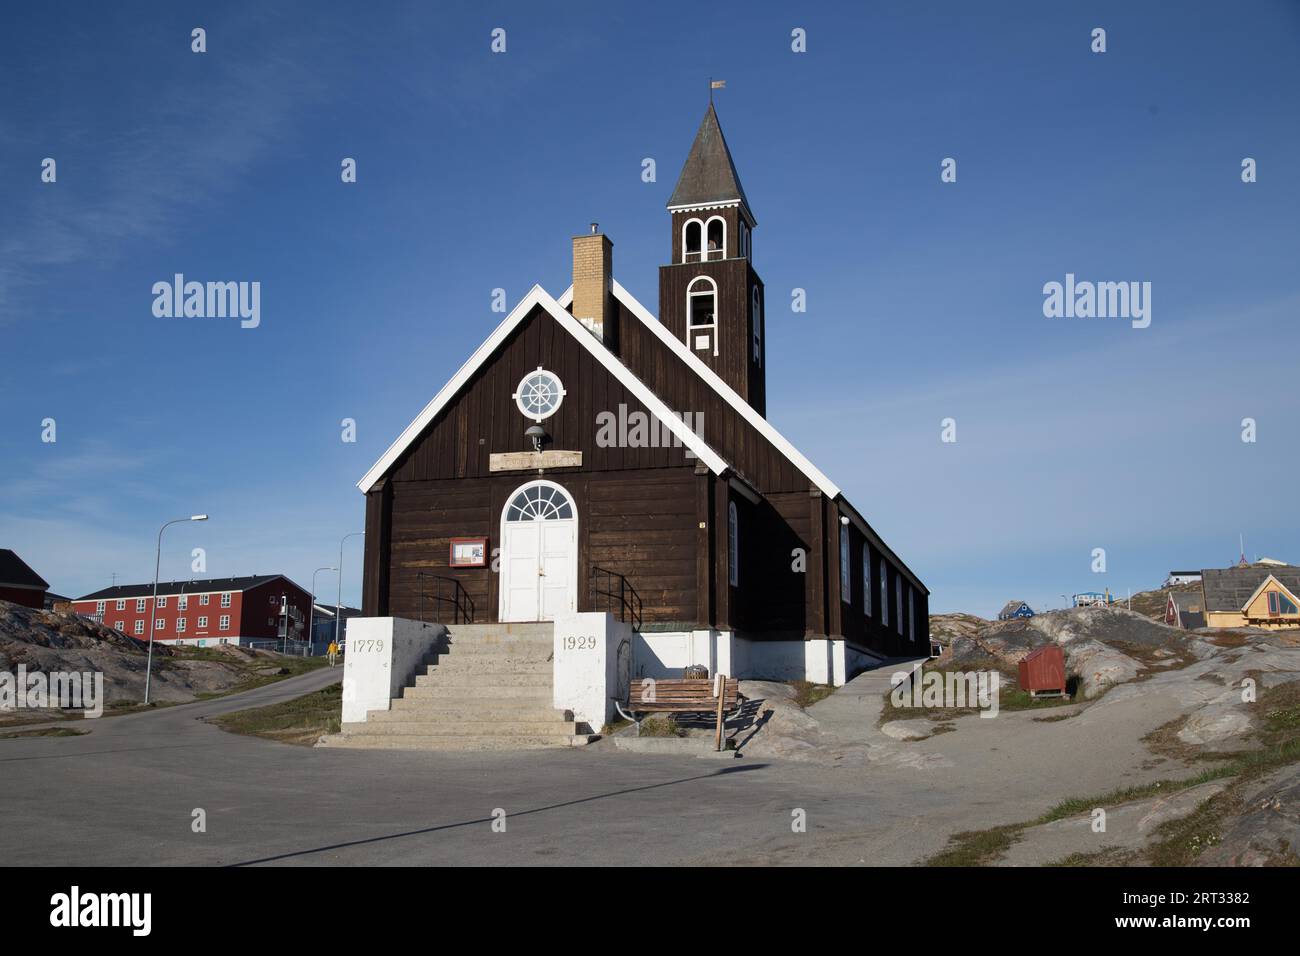 Ilulissat, Greenland, June 30, 2018: Exterior view of the old wooden Zion's Church, one of the northernmost churches in the world Stock Photo